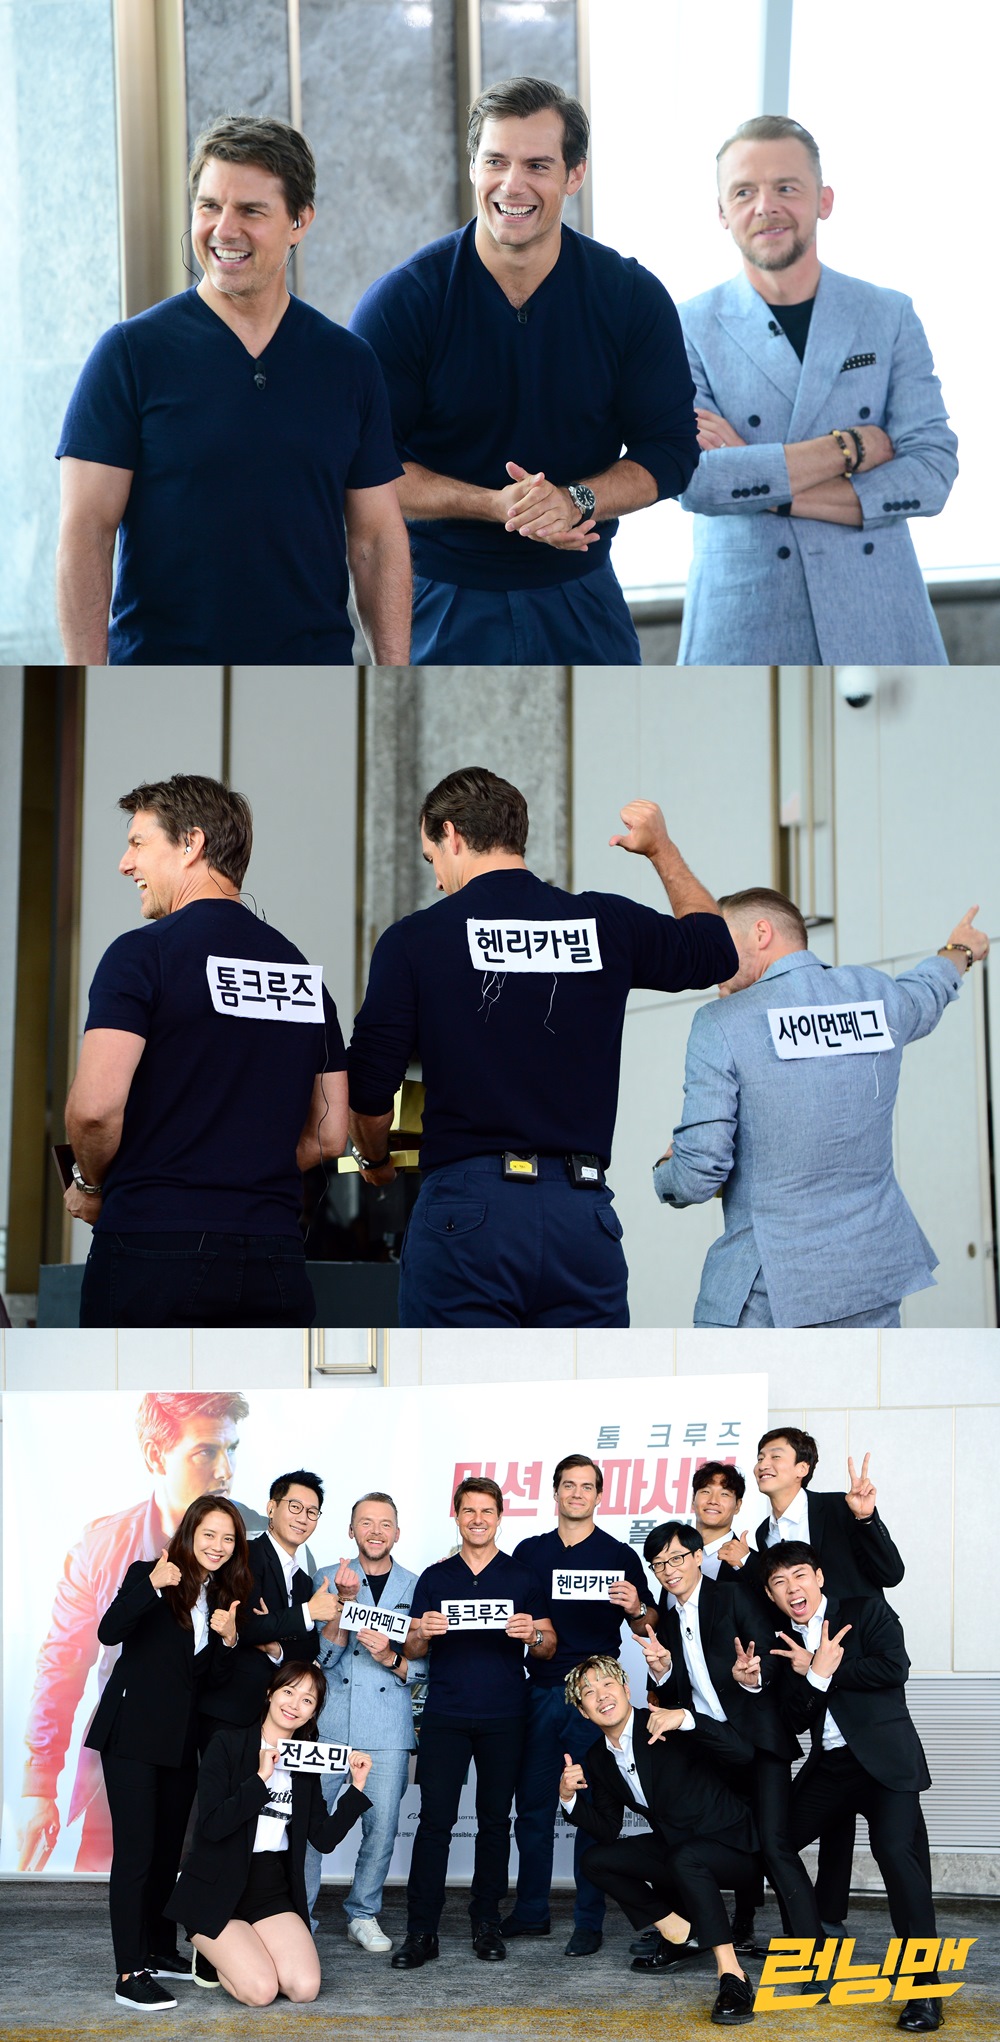 The three actors posed alongside their namesakes in the recent Running Man recording, enthusing members and crew.The actors who saw the name tag in Hangul expressed satisfaction with a strange smile and a bright smile.The recording scene on this day was the firearm itself.The Running Man members and Mission Impossible members had a pleasant time like a team, even though they met for a short time due to a tight schedule.A special confrontation between the Running Man members and the Mission Impossible: Paul Out members can be found in Running Man, which airs today (22nd) at 4:50 pm.